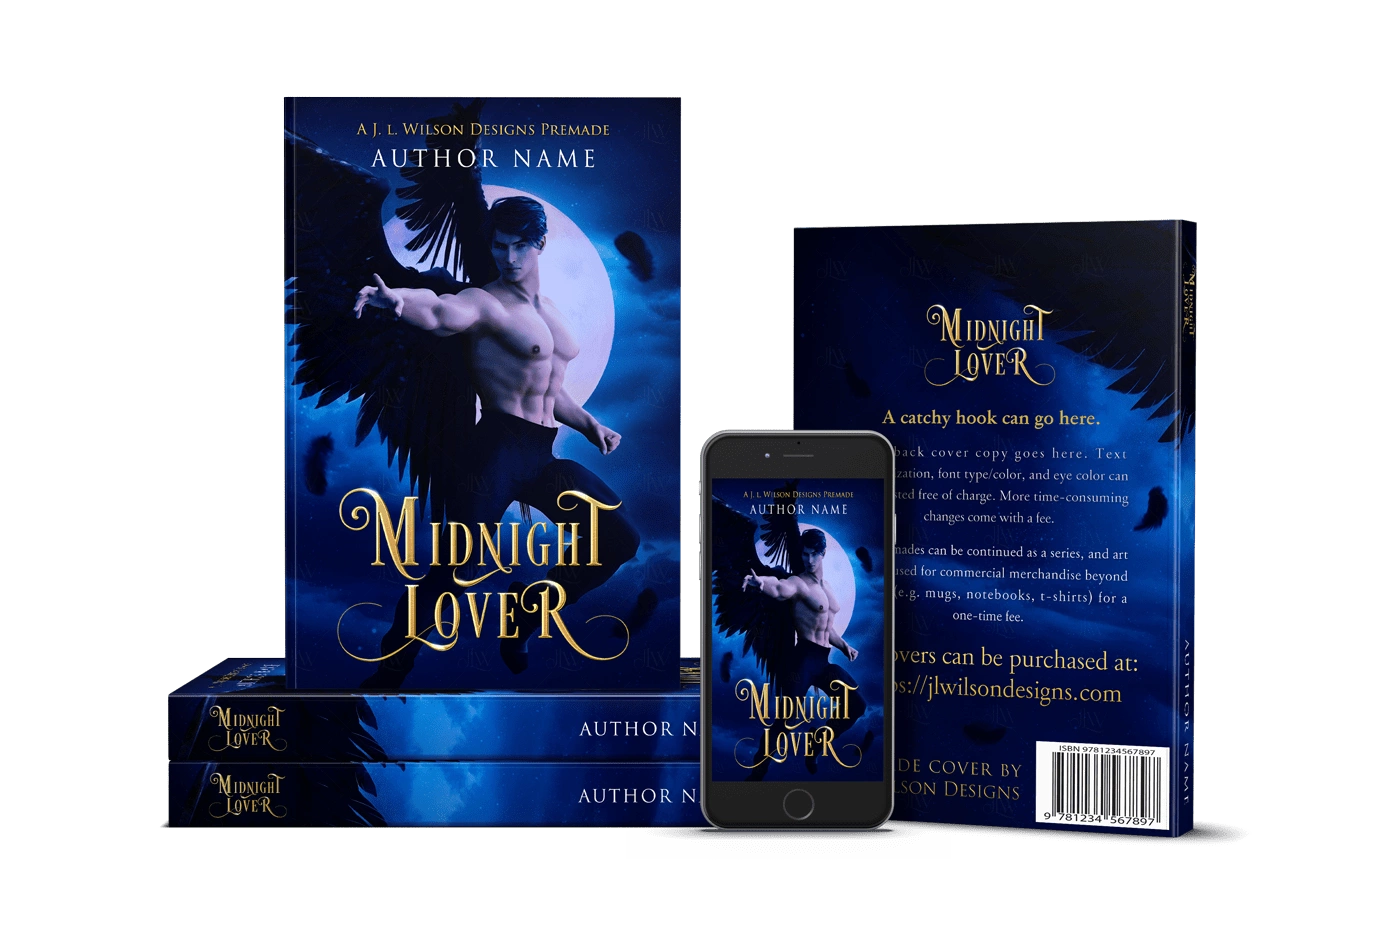 A fantasy romance angel book cover featuring a hot male angel with black wings flying at night